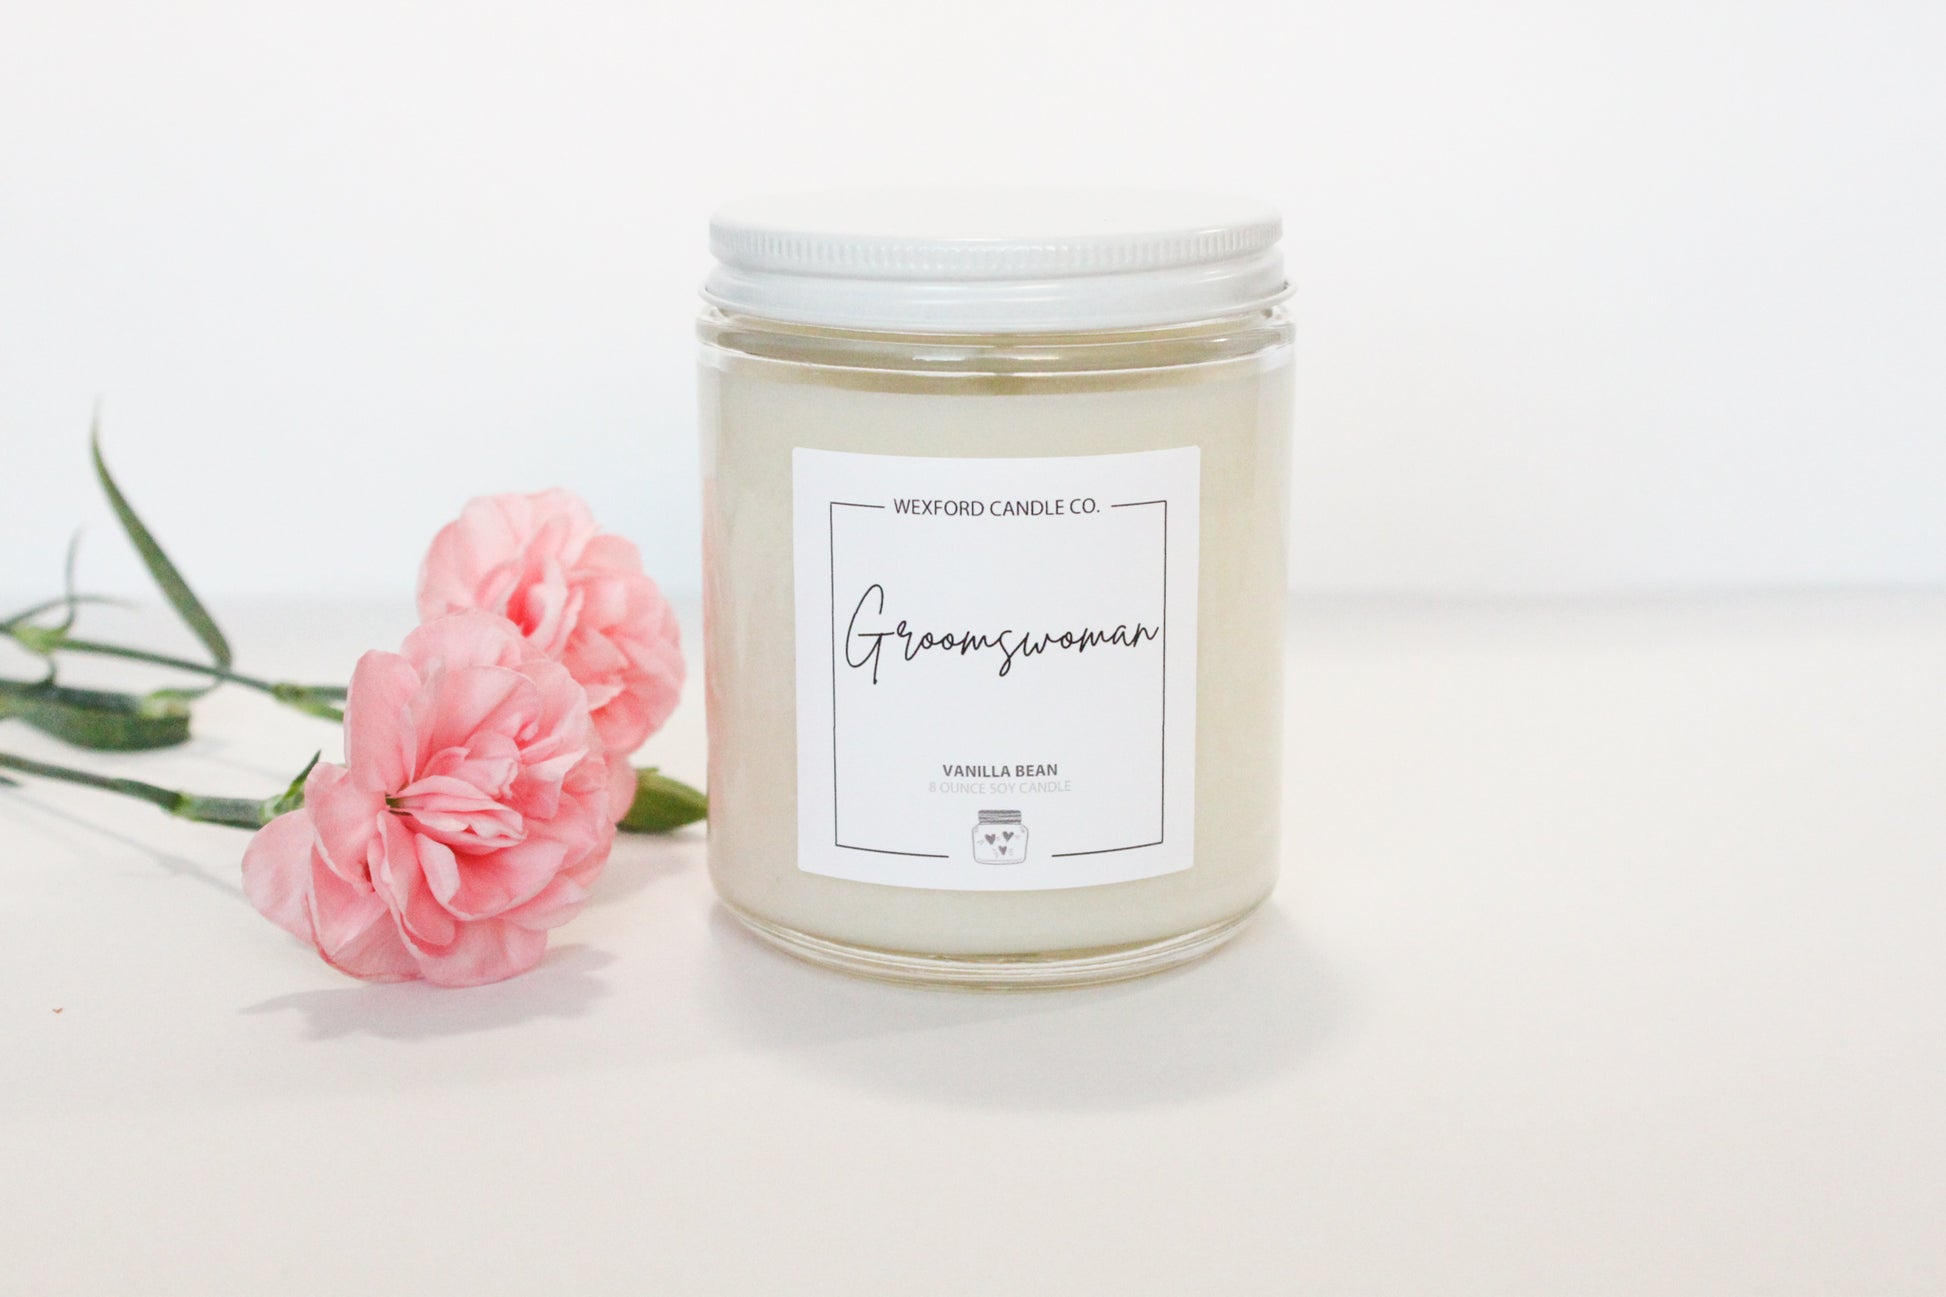 Groomswoman Soy Candle - Wexford Candle Co.